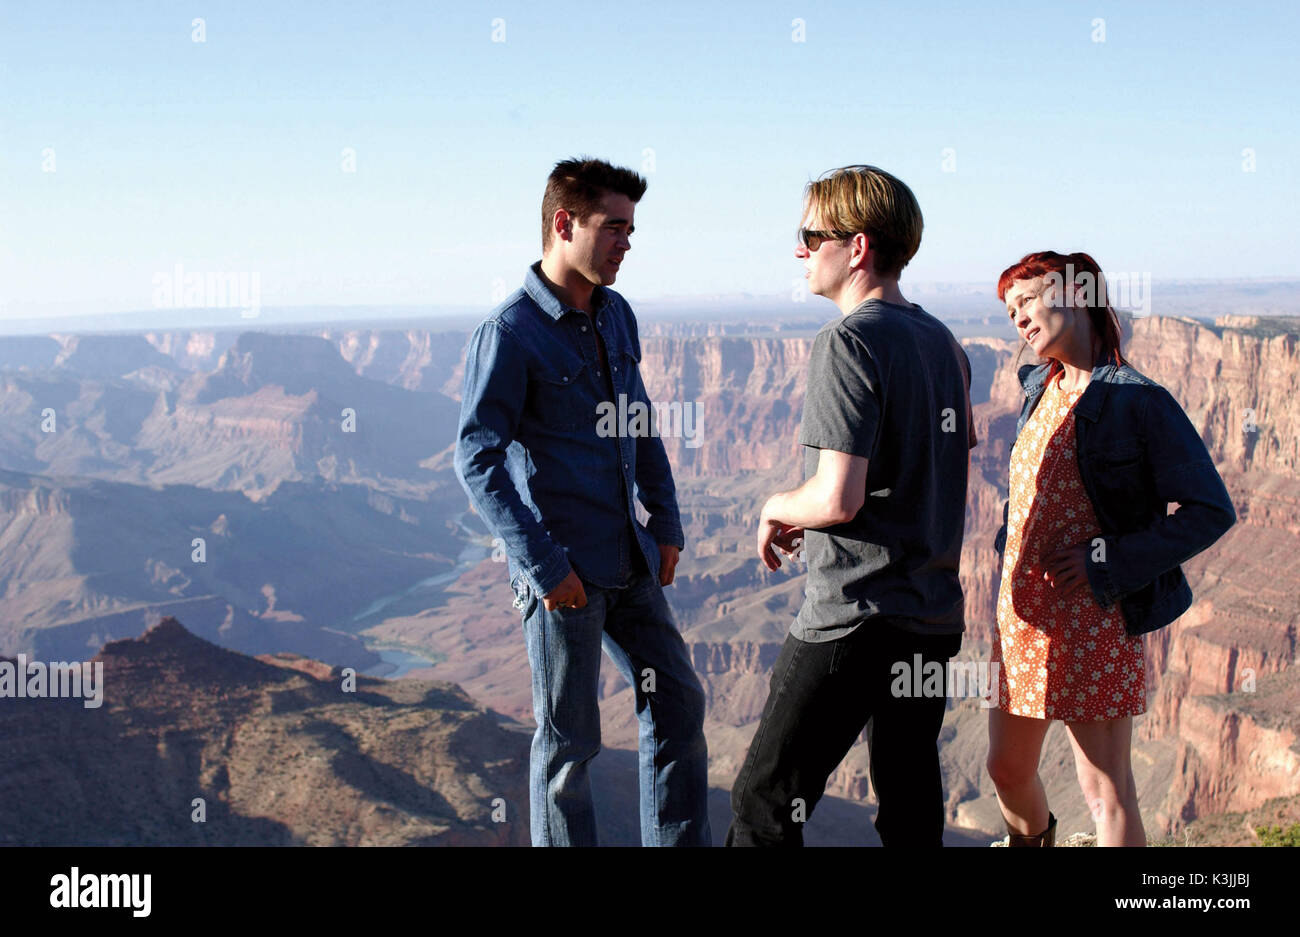 A HOME AT THE END OF THE WORLD COLIN FARRELL, DALLAS ROBERTS and ROBIN WRIGHT PENN at the Grand Canyon A HOME AT THE END OF THE WORLD      Date: 2004 Stock Photo